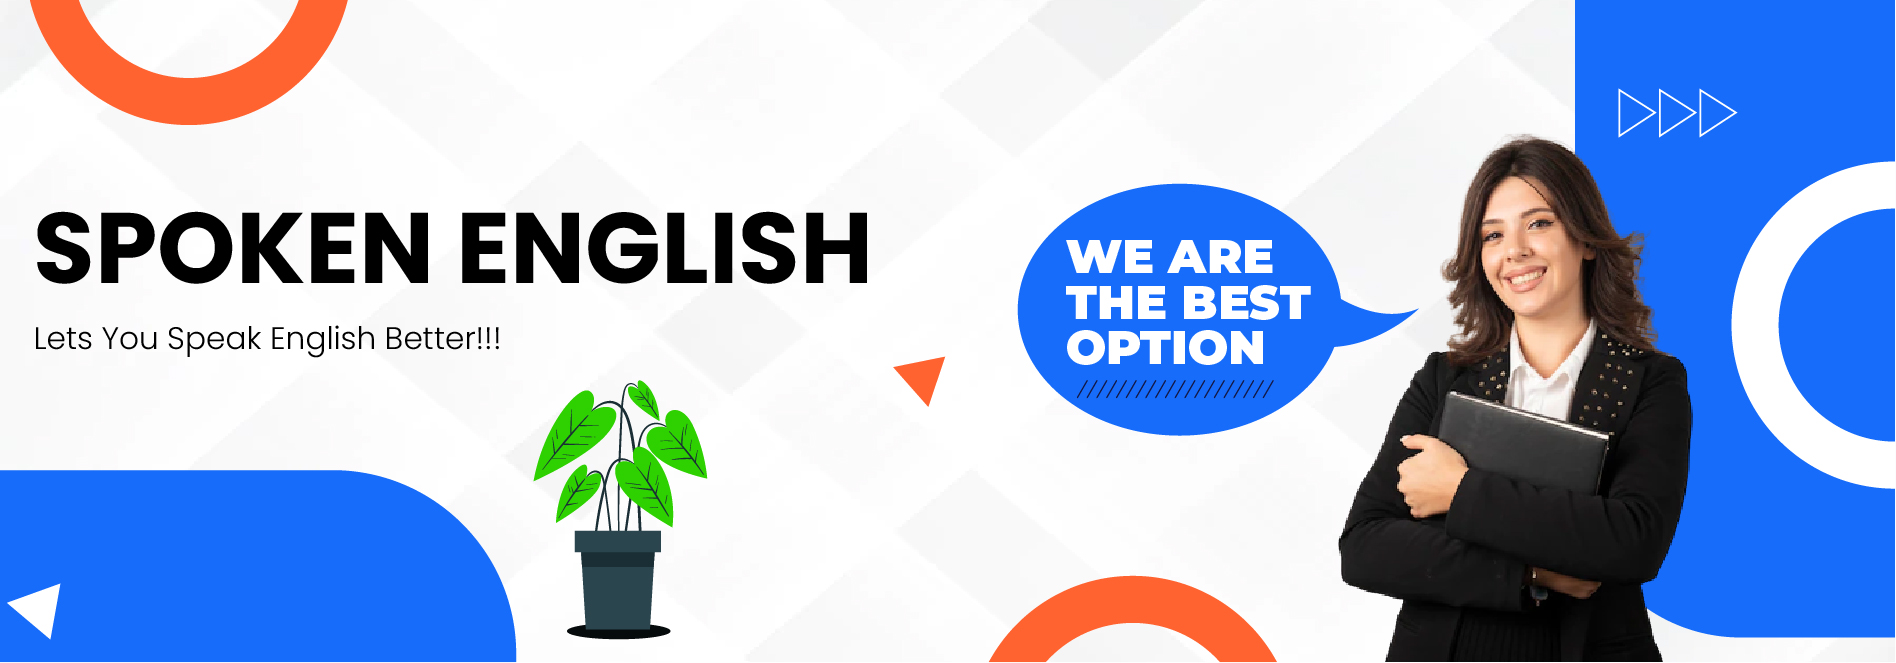 Aim Spoken English Classes in Bhatta-paldi,Ahmedabad - Best Language  Classes For English Conversation in Ahmedabad - Justdial